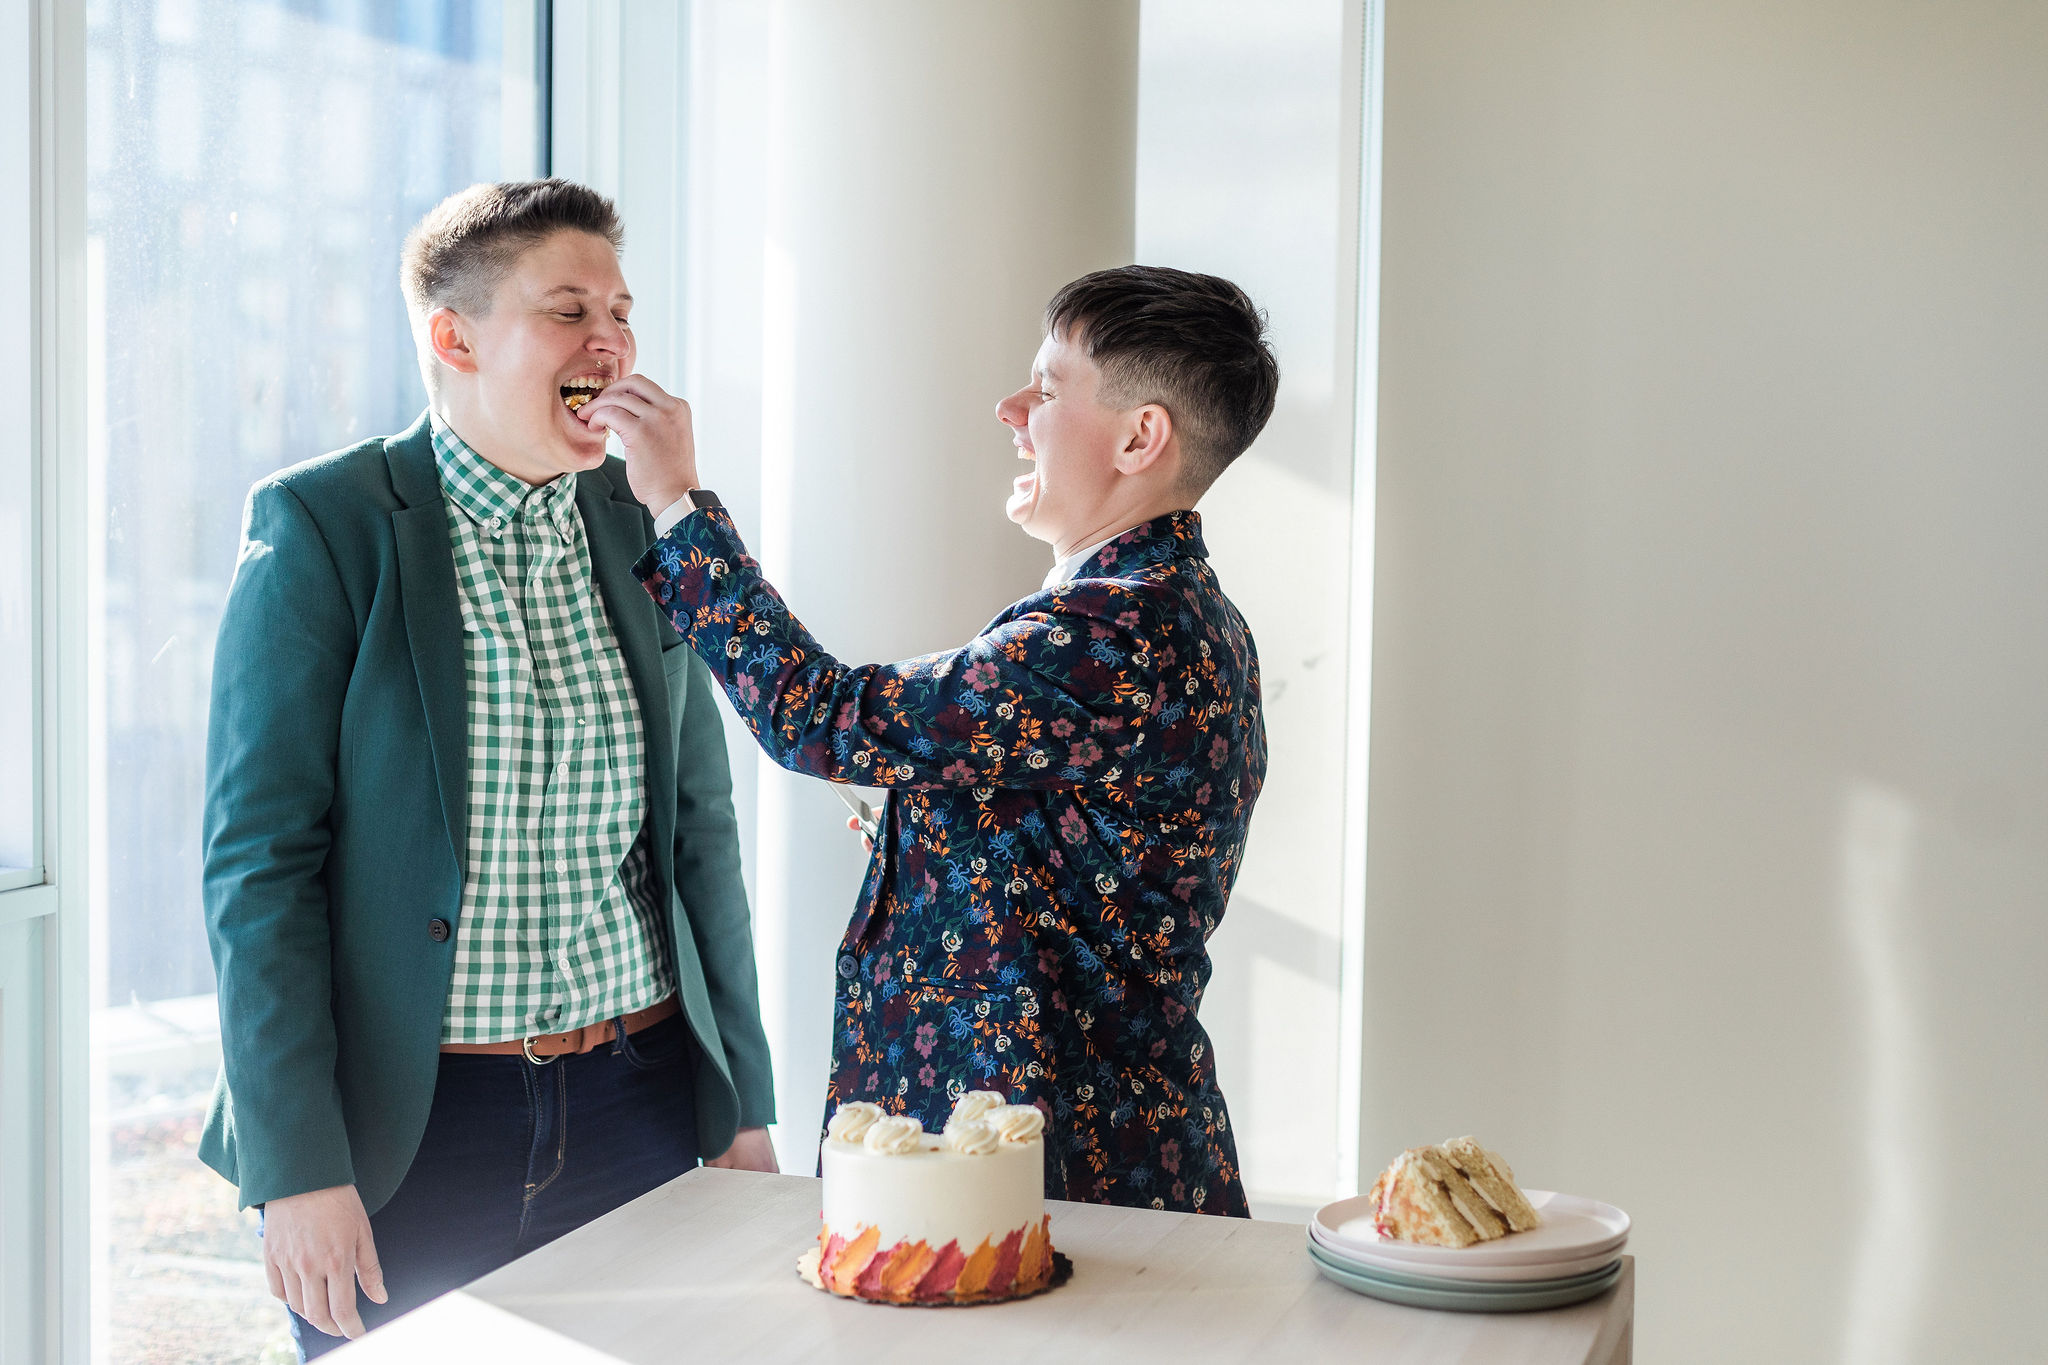 queer couple eating wedding cake, find lgbtq friendly wedding vendors in 2023